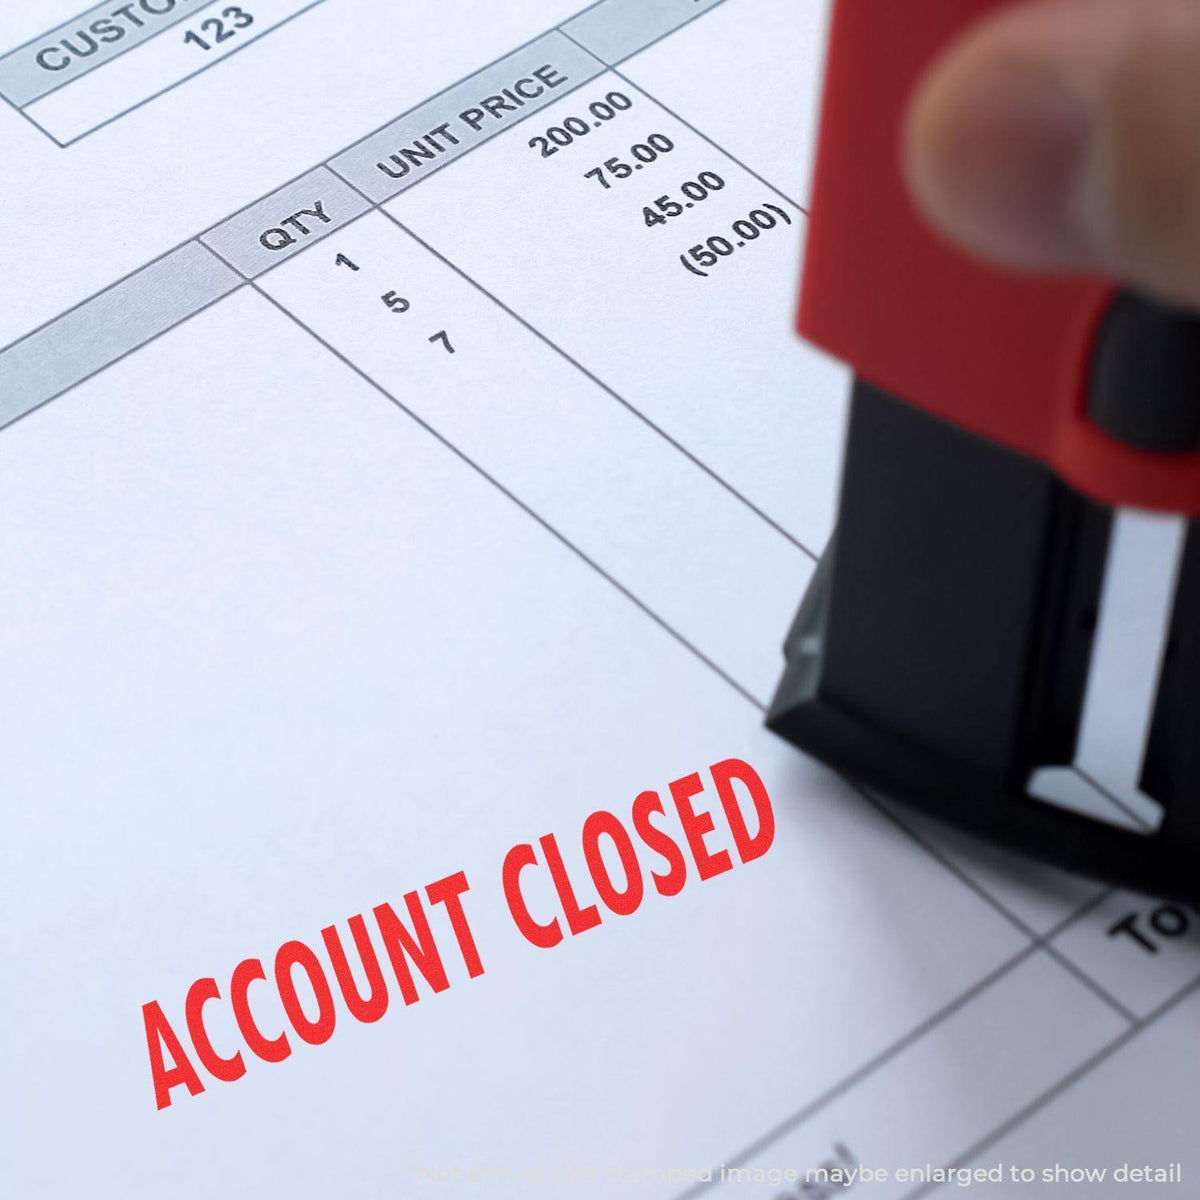 Large Self-Inking Account Closed Stamp image, showing &quot;ACCOUNT CLOSED&quot; message in large red font on an invoice.